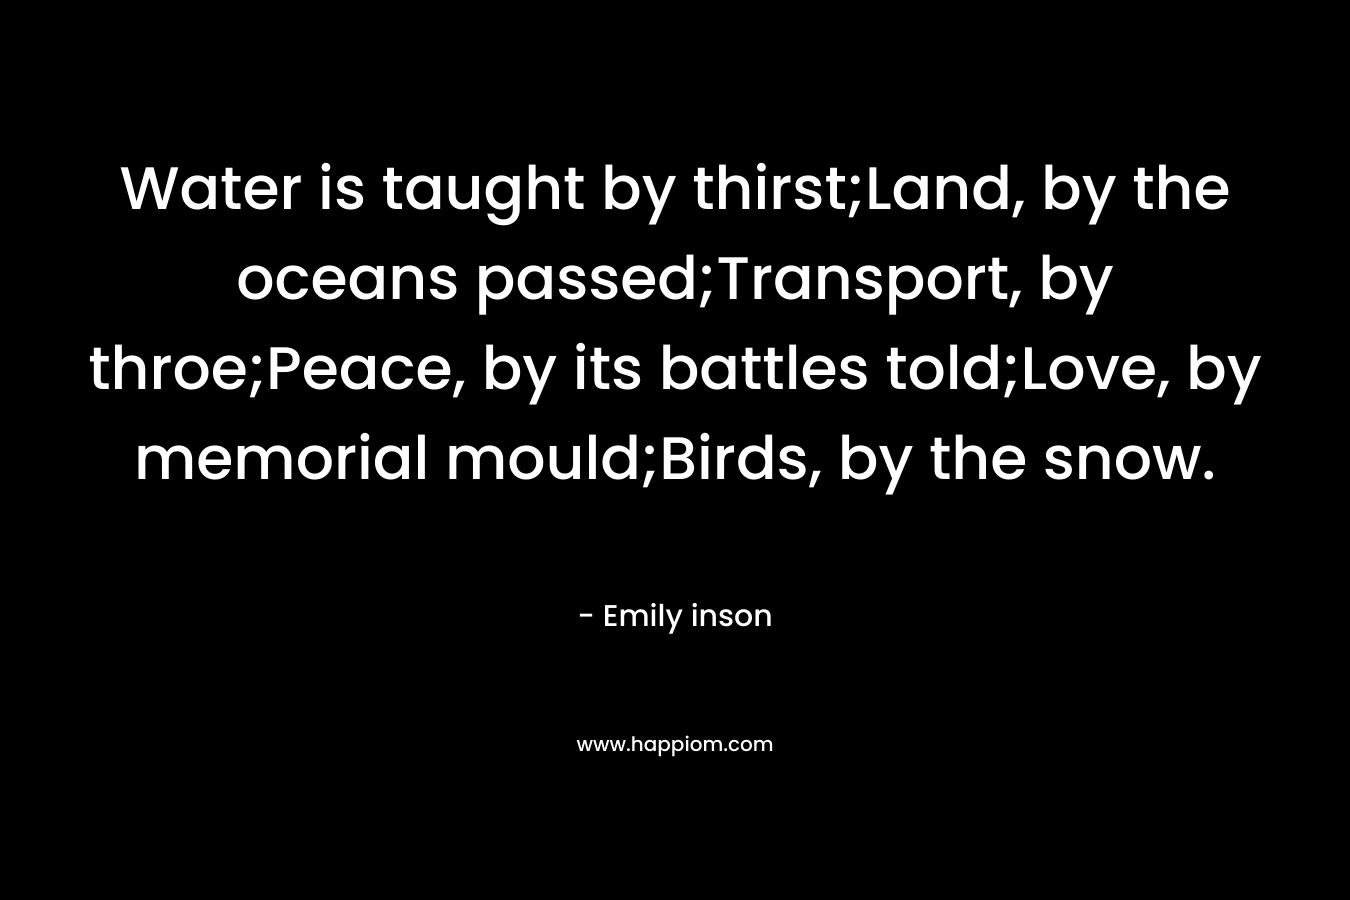 Water is taught by thirst;Land, by the oceans passed;Transport, by throe;Peace, by its battles told;Love, by memorial mould;Birds, by the snow.